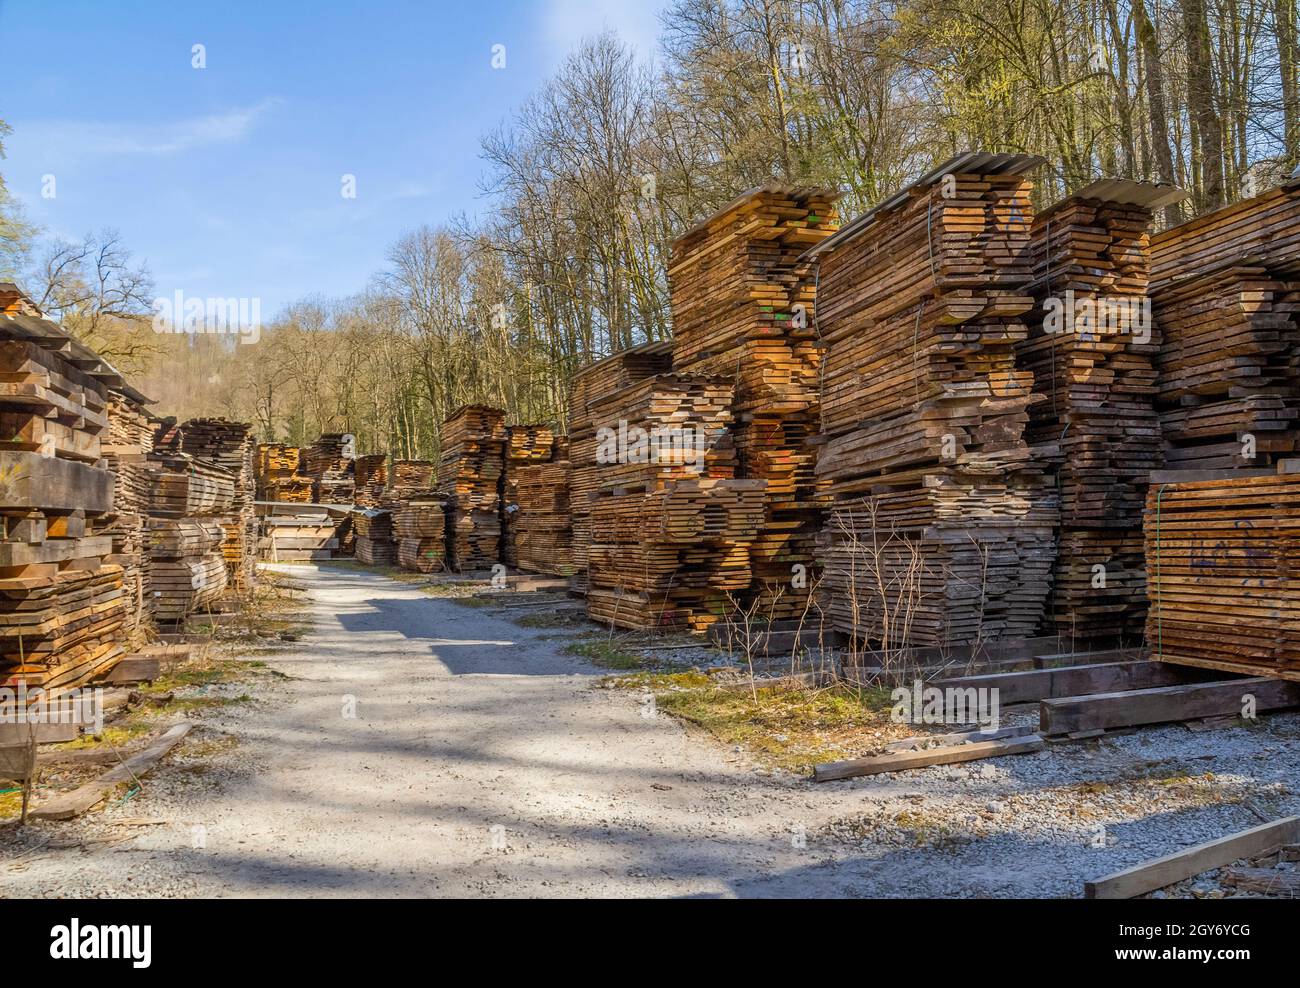 Lots of stacked wooden boards on a lumber yard in sunny ambiance Stock Photo